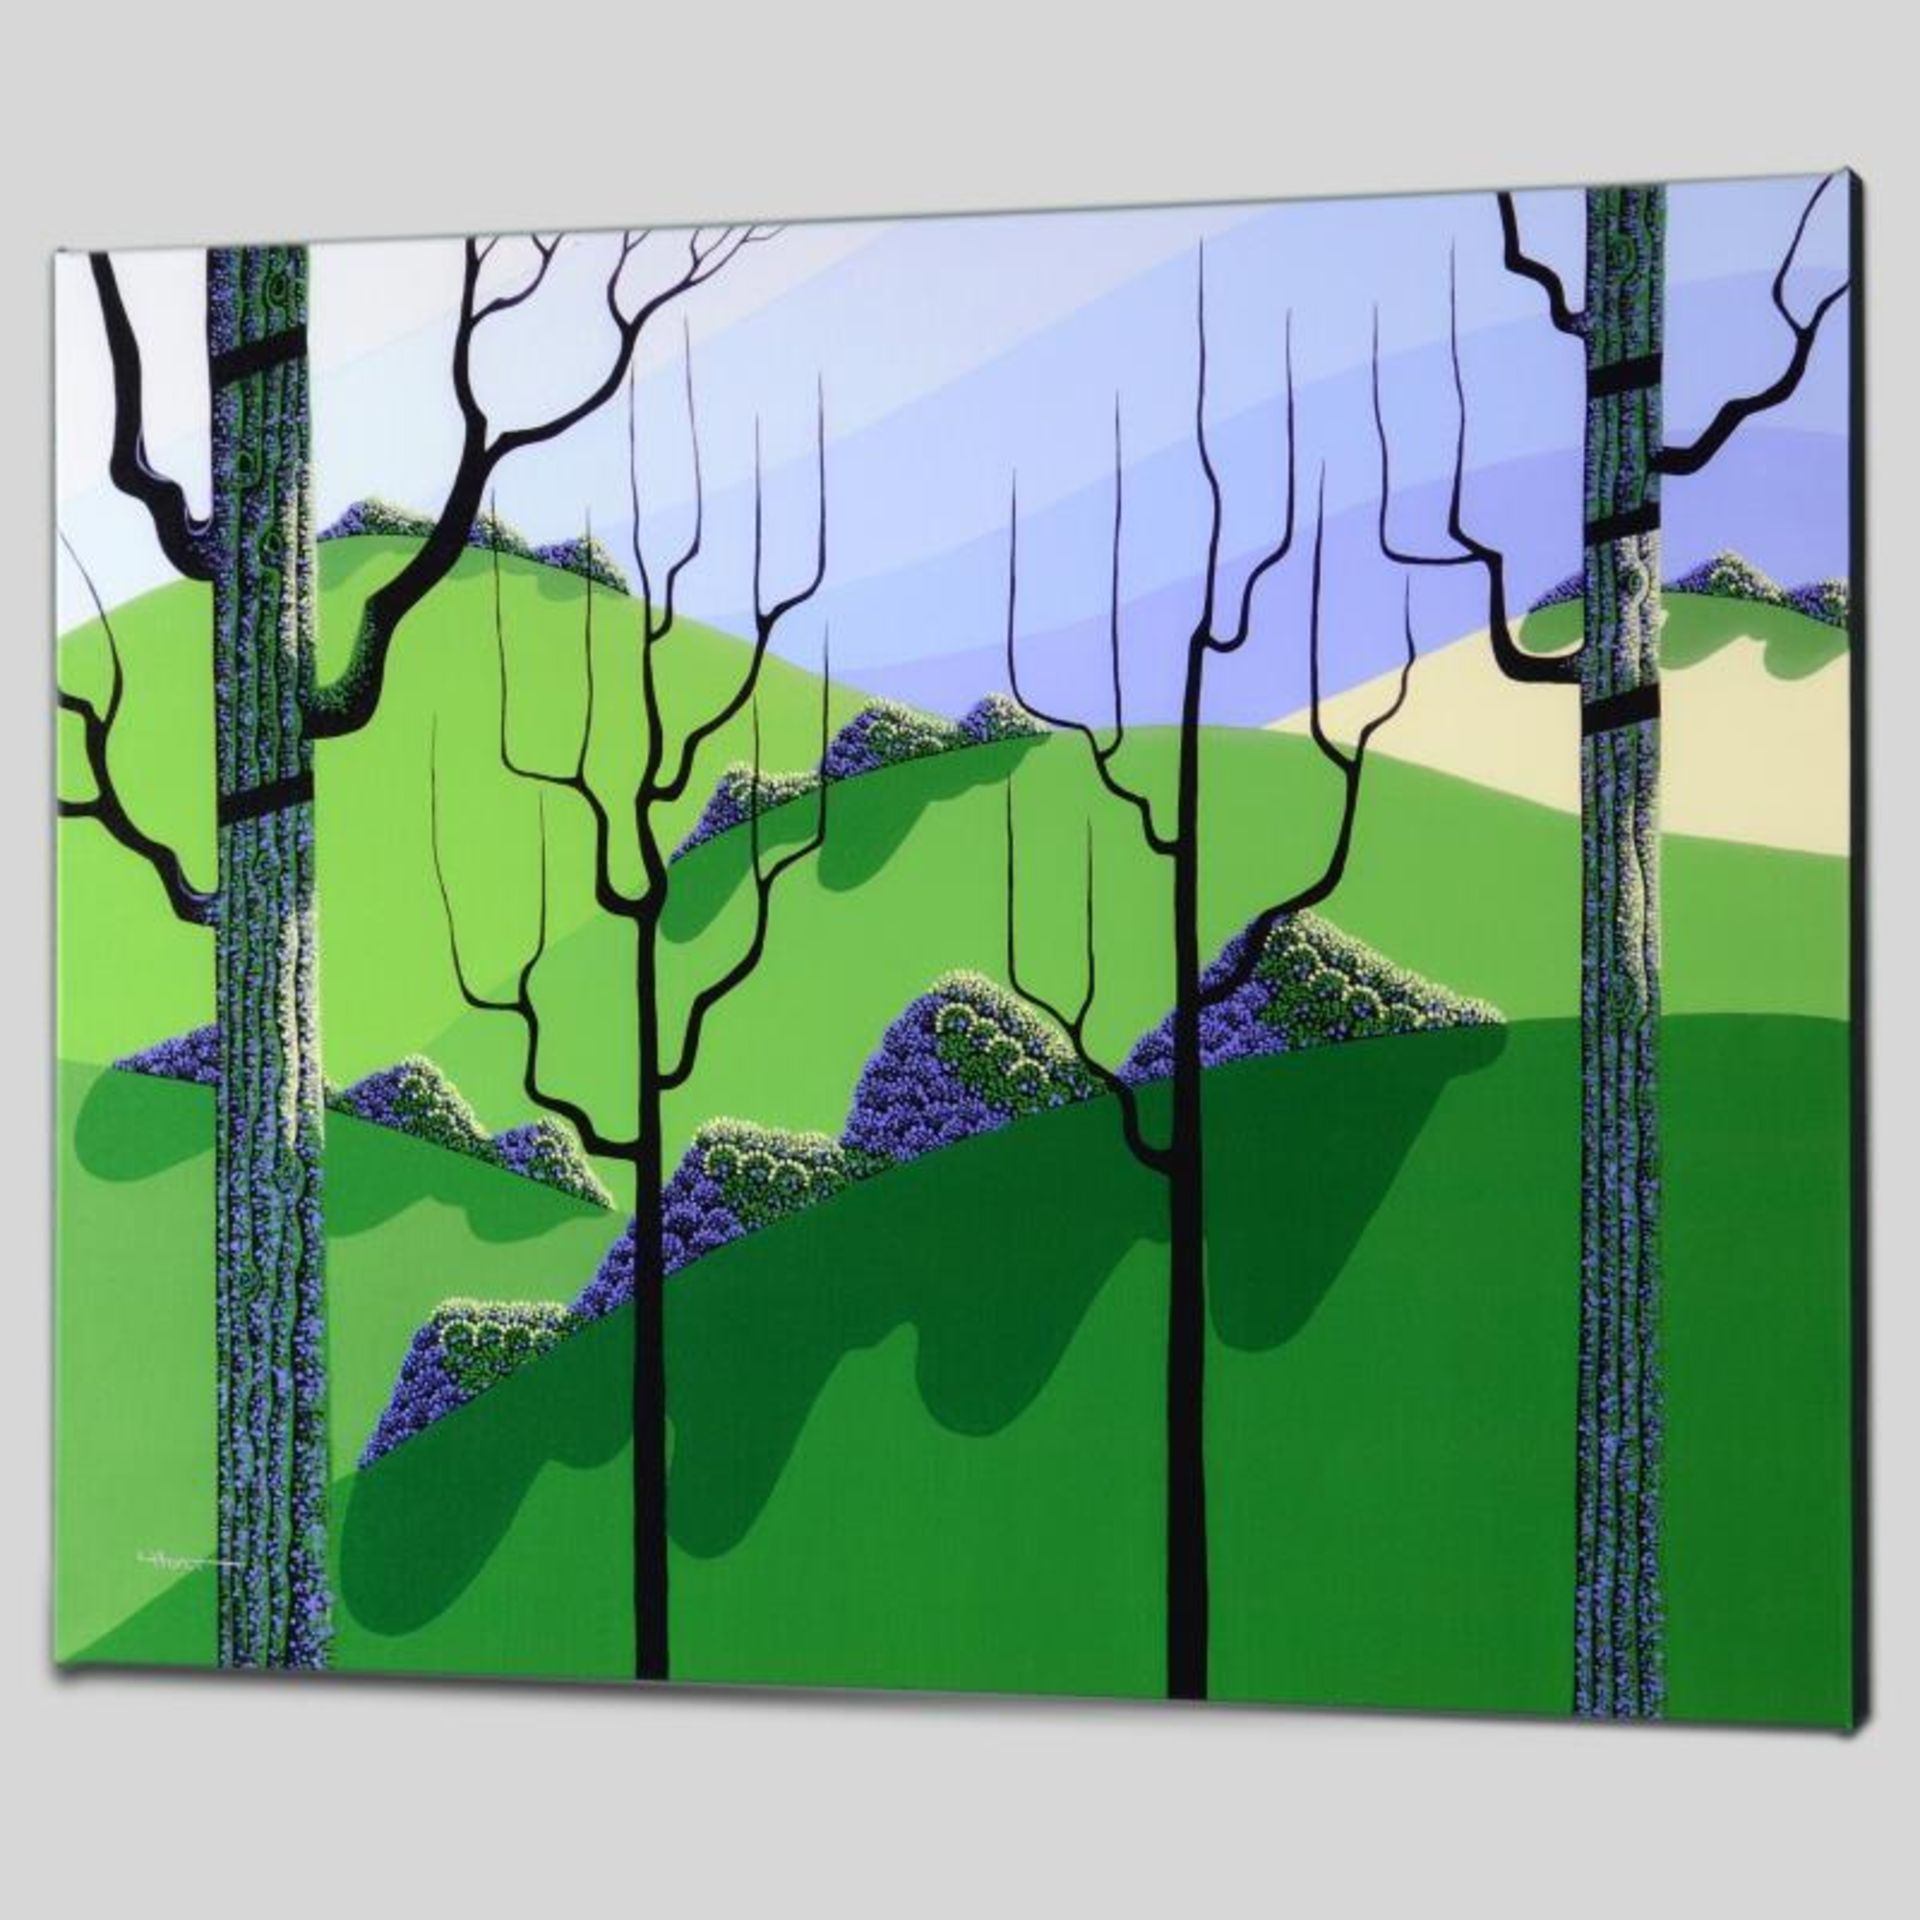 "Over Hills" Limited Edition Giclee on Canvas by Larissa Holt, Numbered and Sign - Image 2 of 2